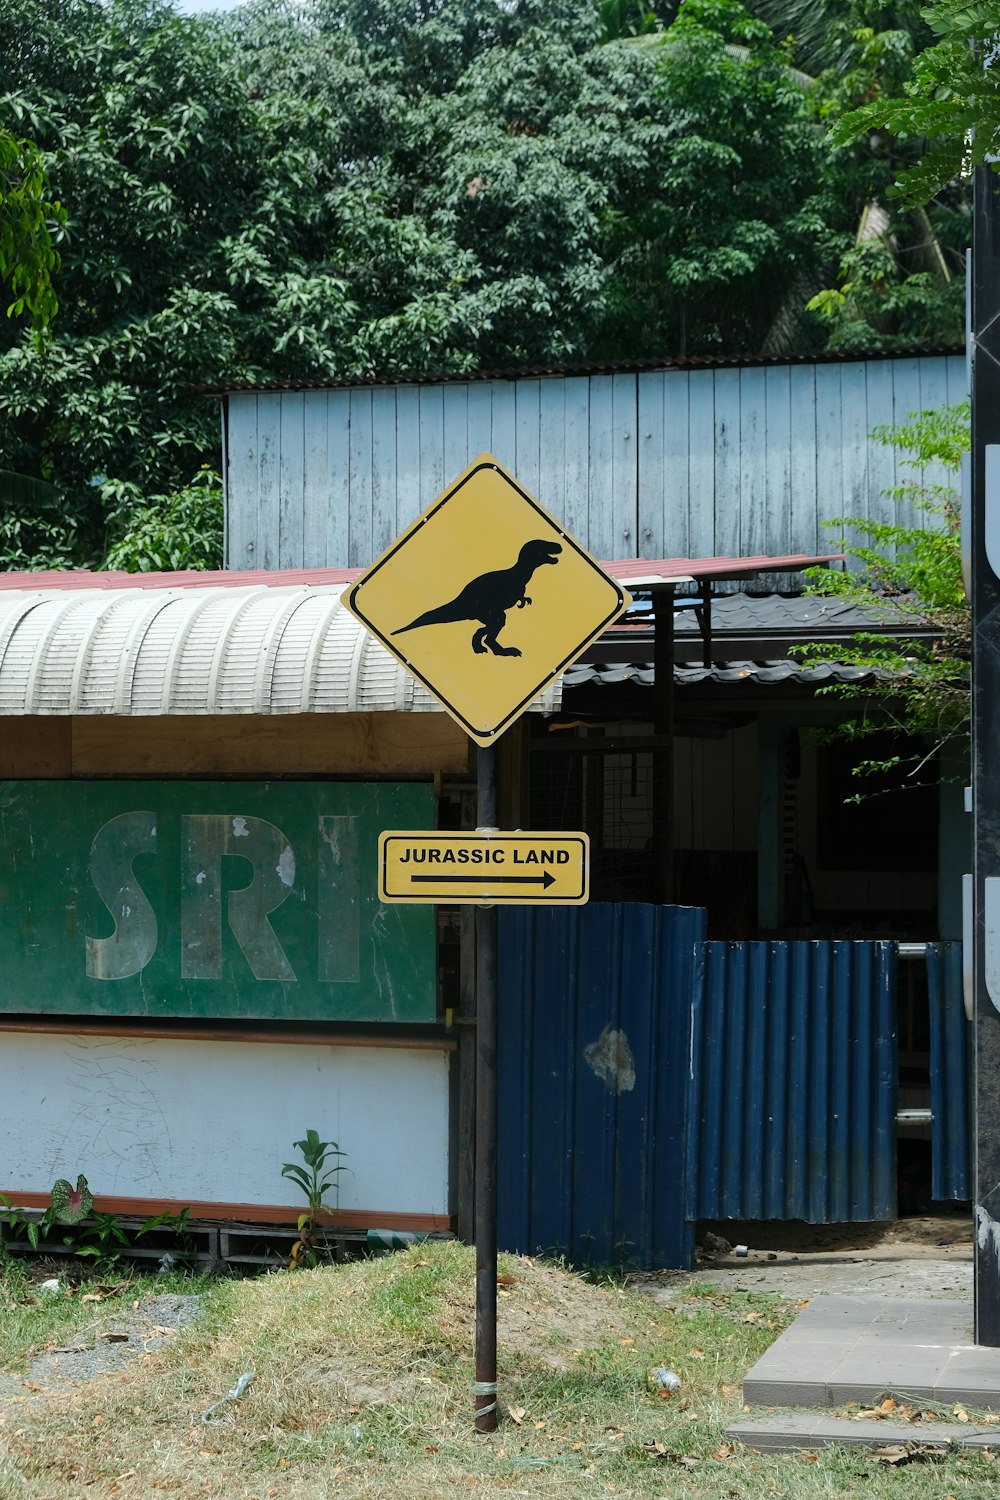 a yellow dinosaur crossing sign in front of a building